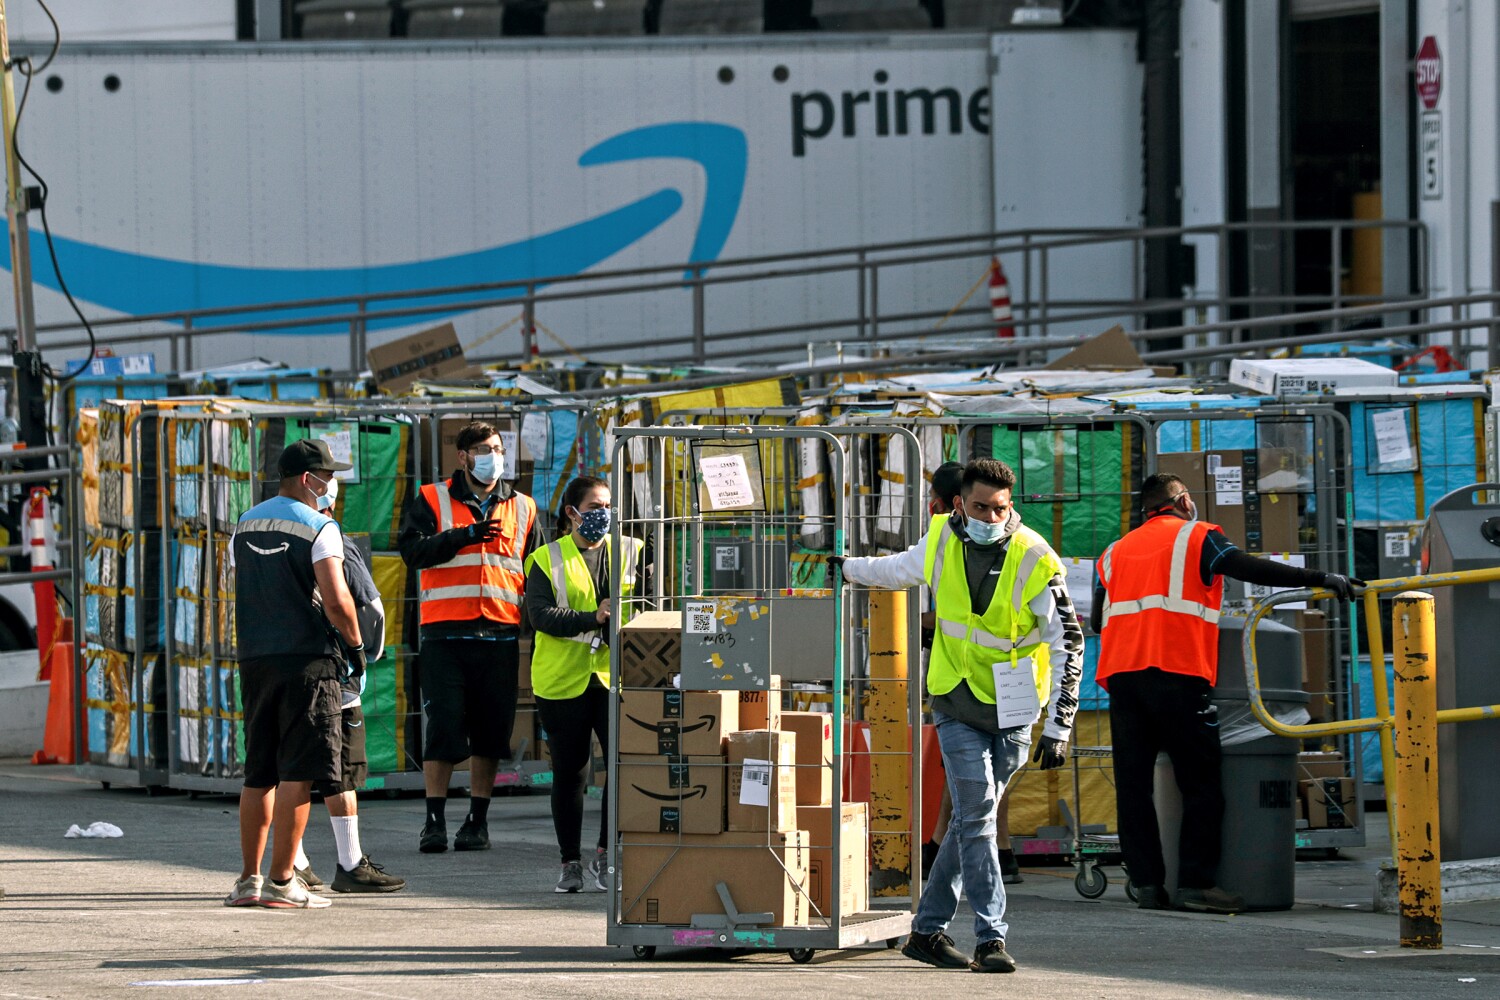 Amazon drones may start to deliver packages in Northern California this year